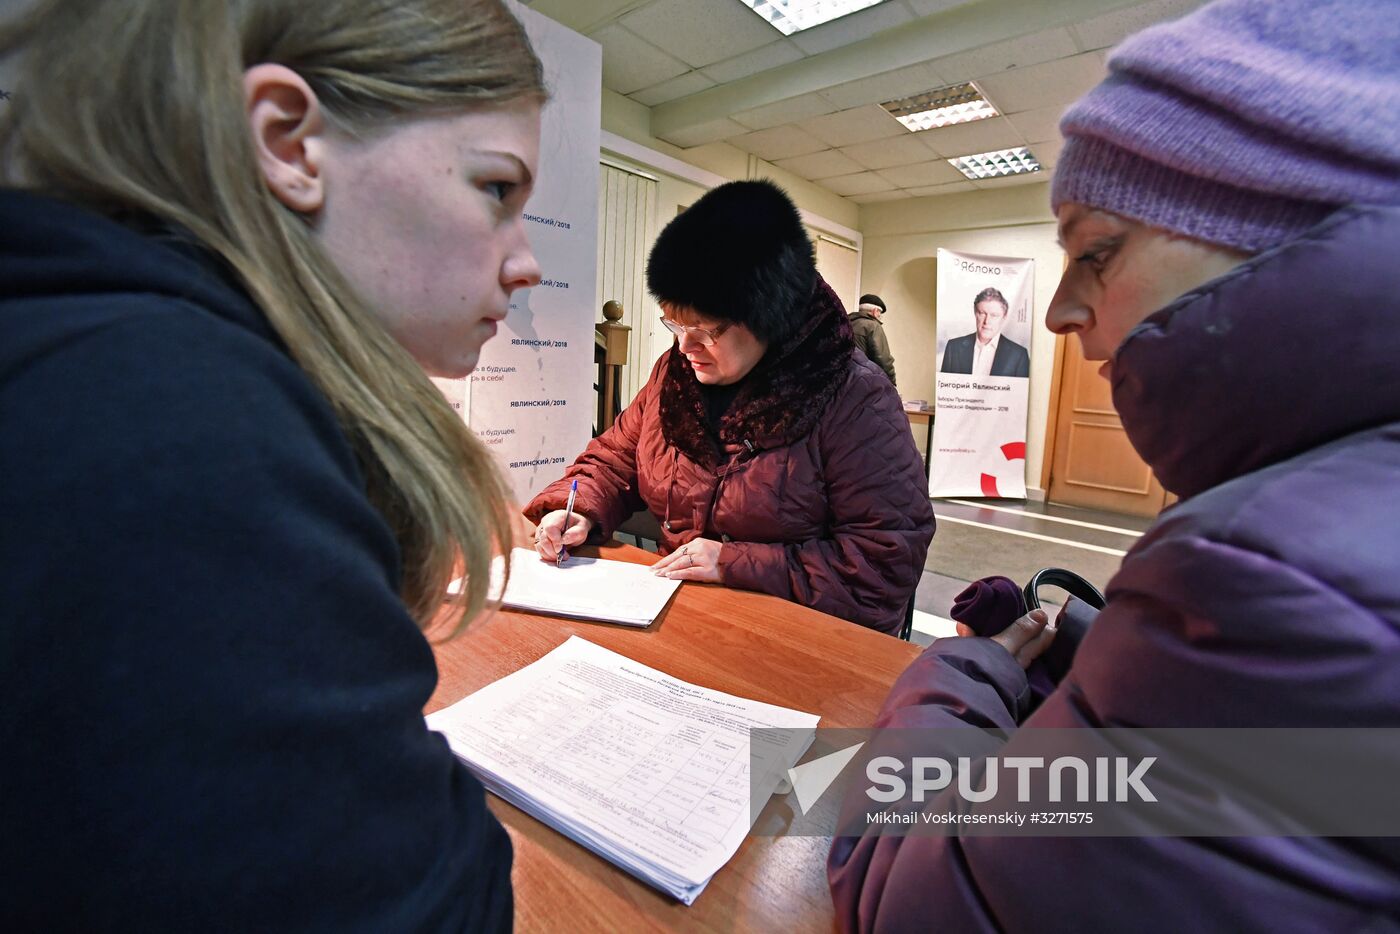 Collecting signatures to support Grigory Yavlinsky's candidacy for 2018 Russian presidential election